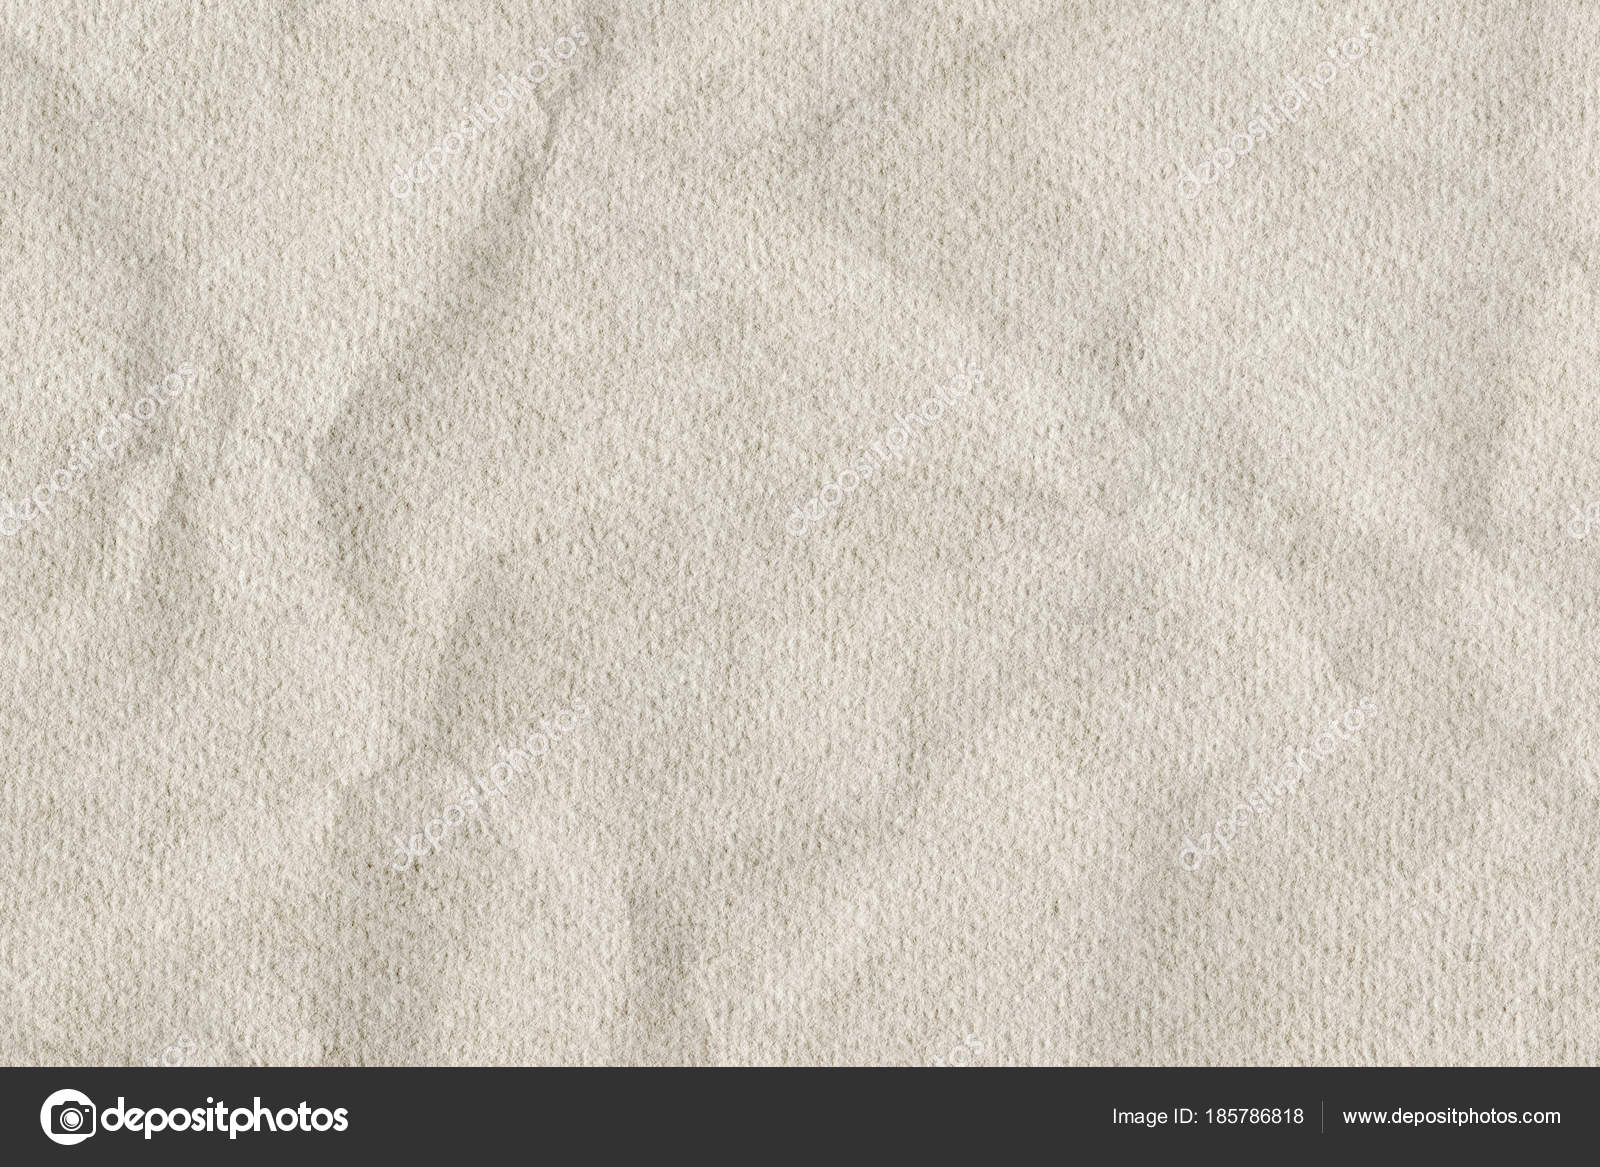 Off white backgrounds | High Resolution Off White Coarse Grain Watercolor  Paper Crushed Grunge Background Texture — Stock Photo © Berka777 #185786818